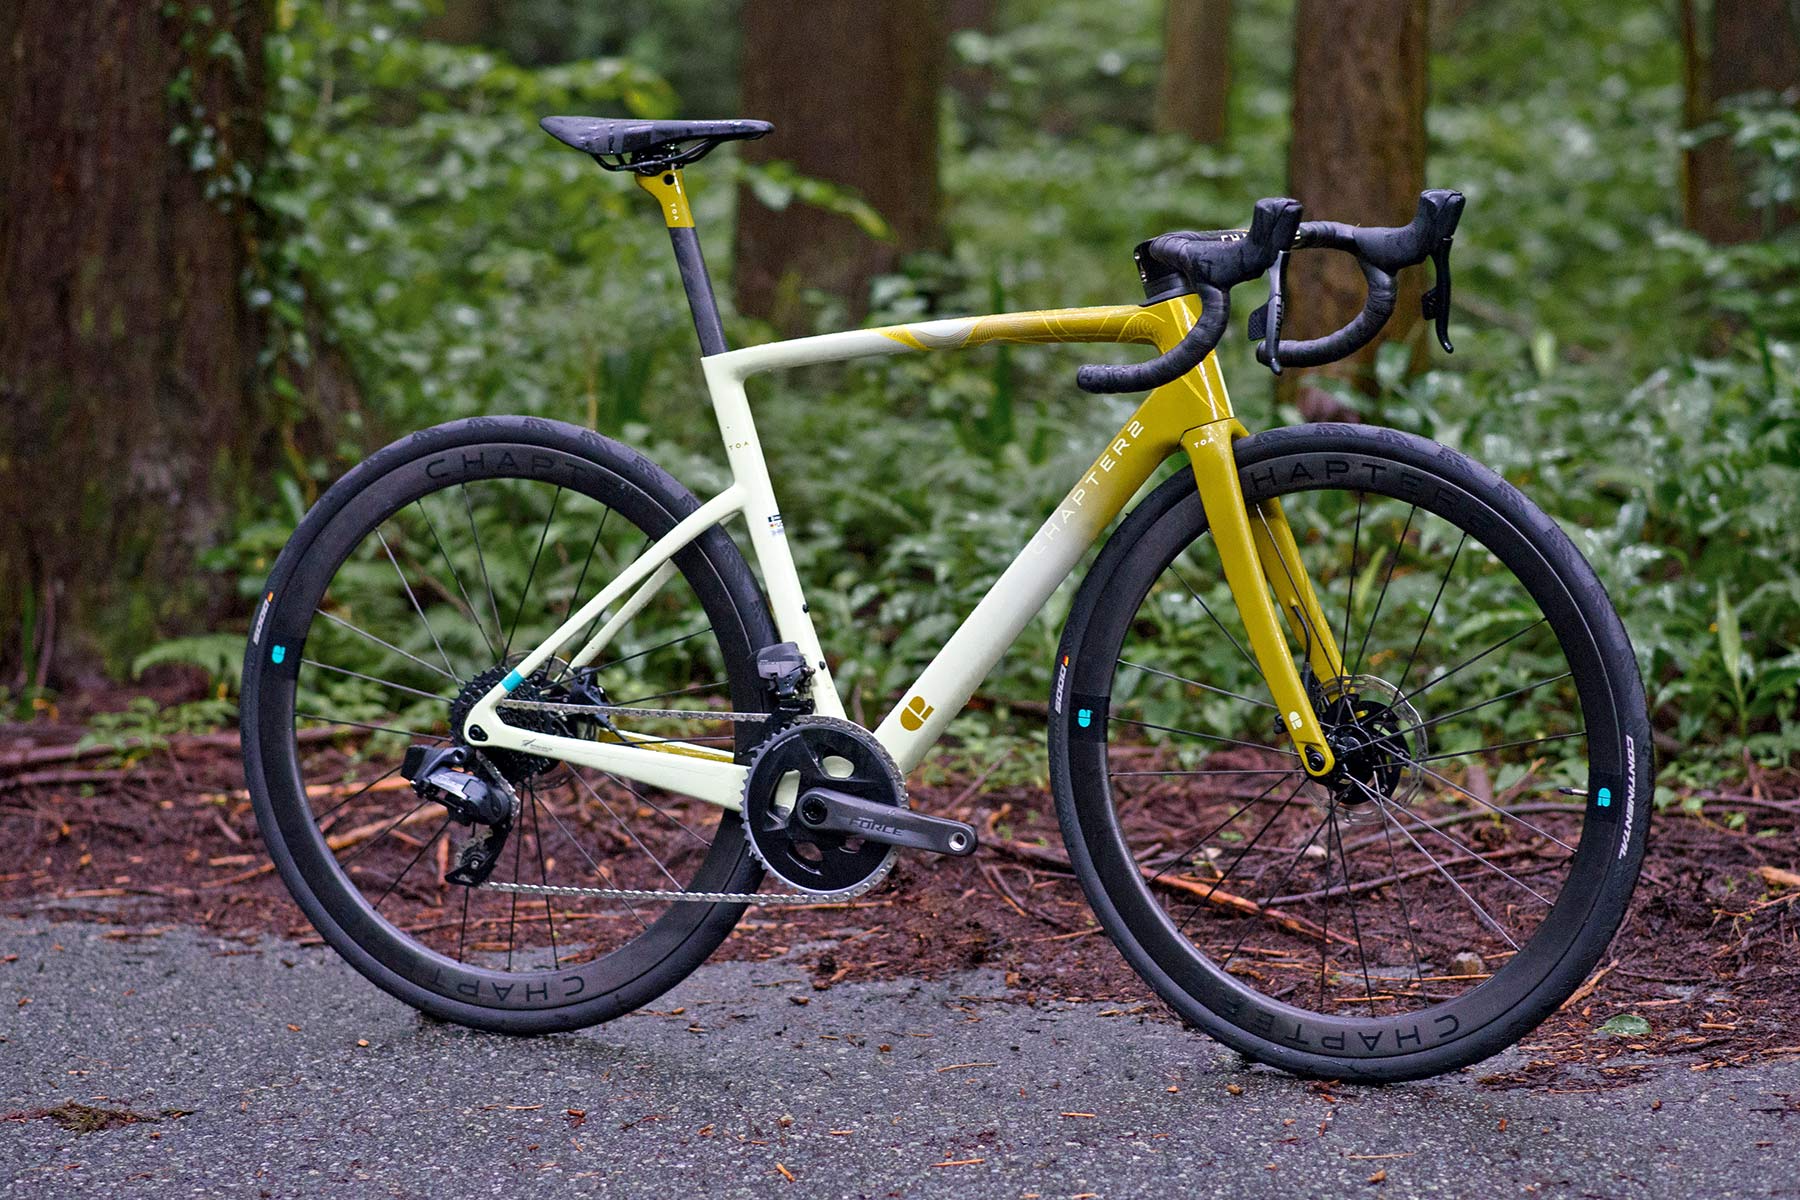 Chapter2 TOA all-road bike, fully integrated versatile aero carbon road bike